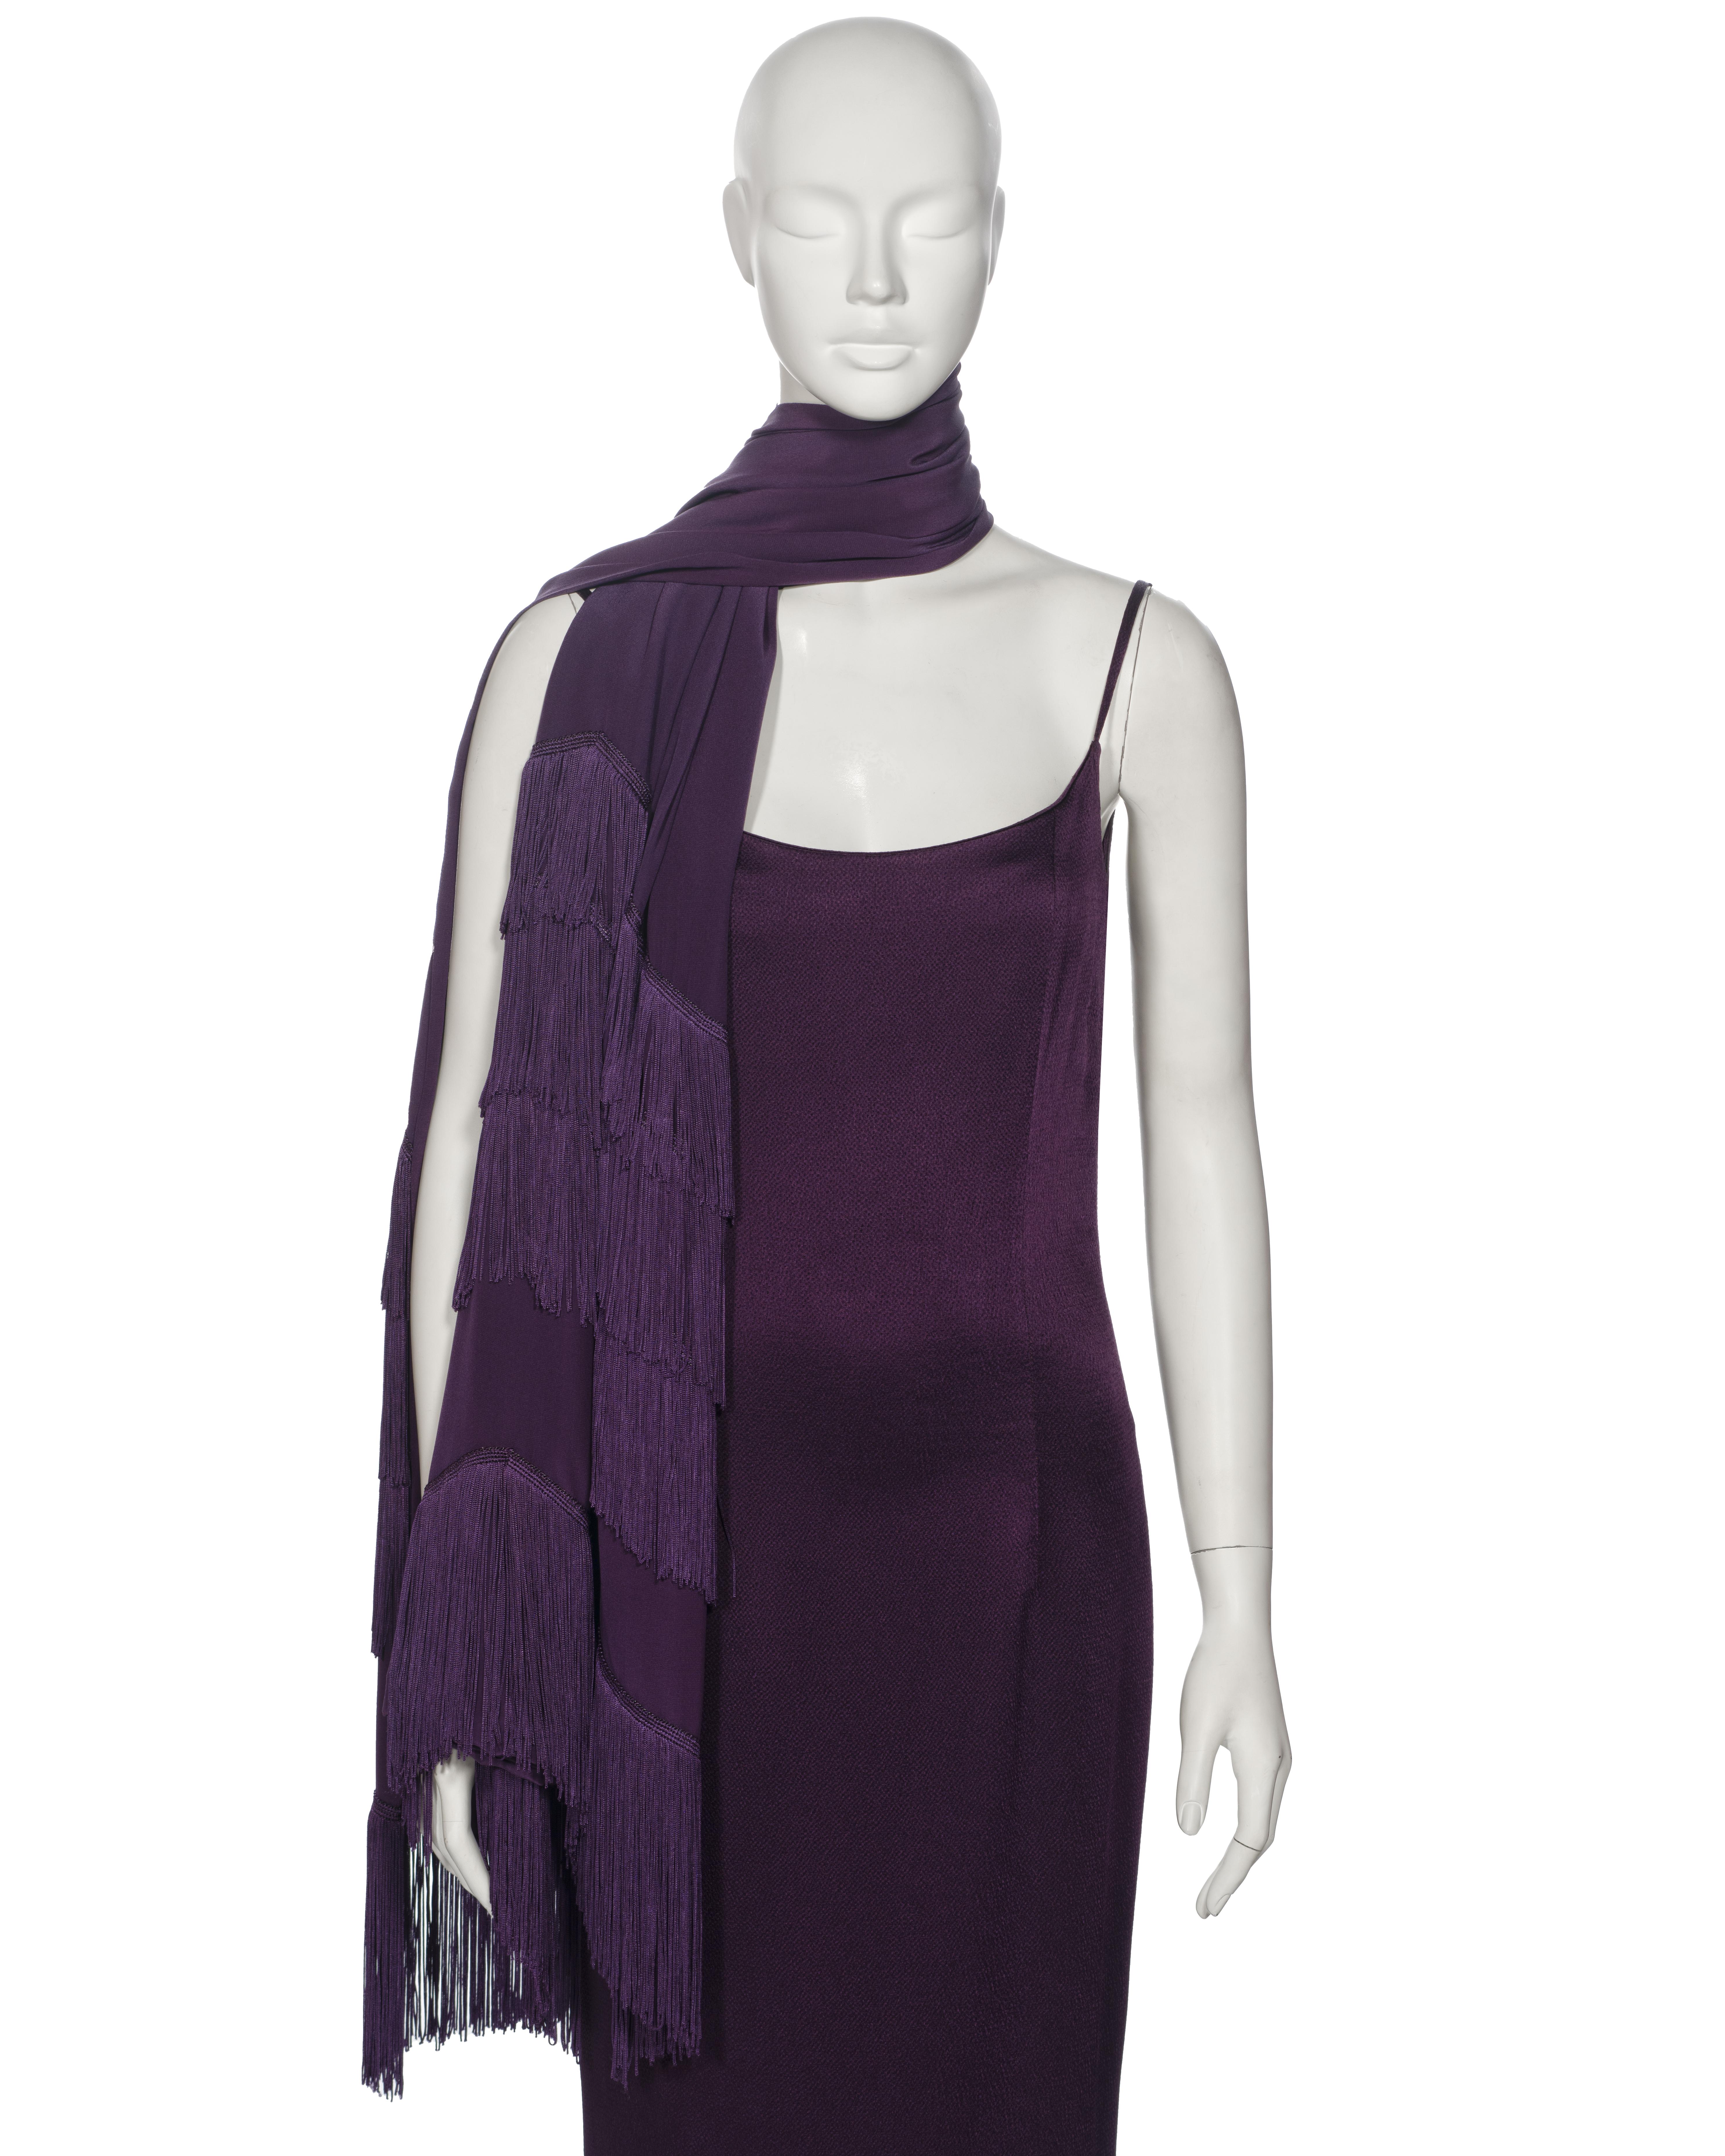 Christian Dior by John Galliano Purple Satin Evening Dress and Shawl, ss 1998 In Excellent Condition For Sale In London, GB